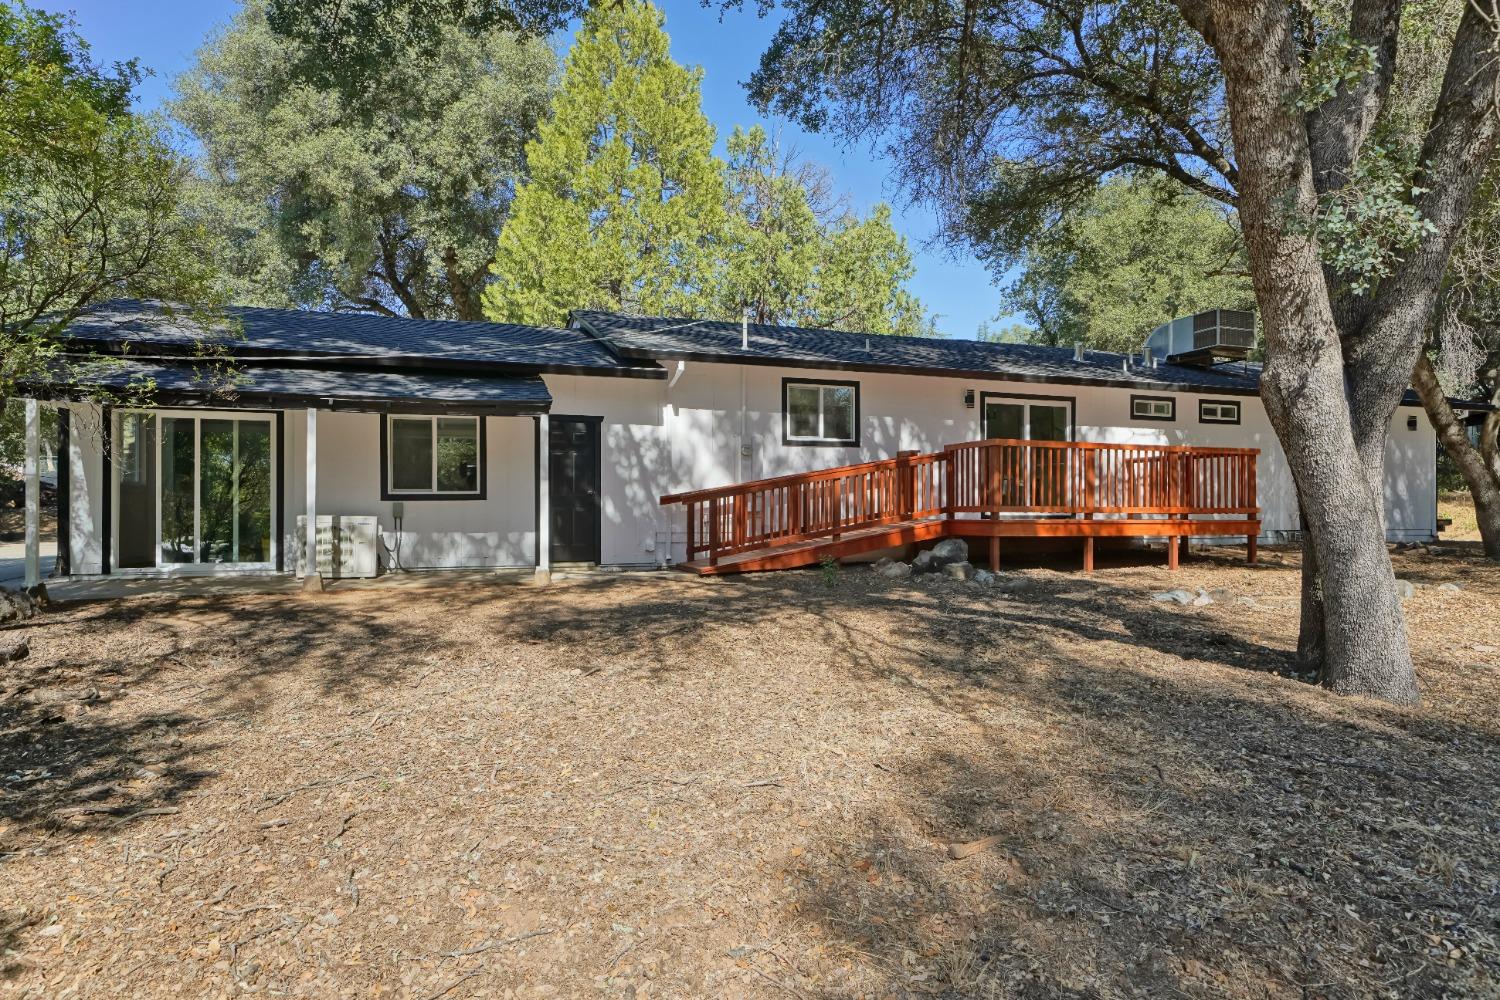 Photo of 2070 Petri Ln in Placerville, CA